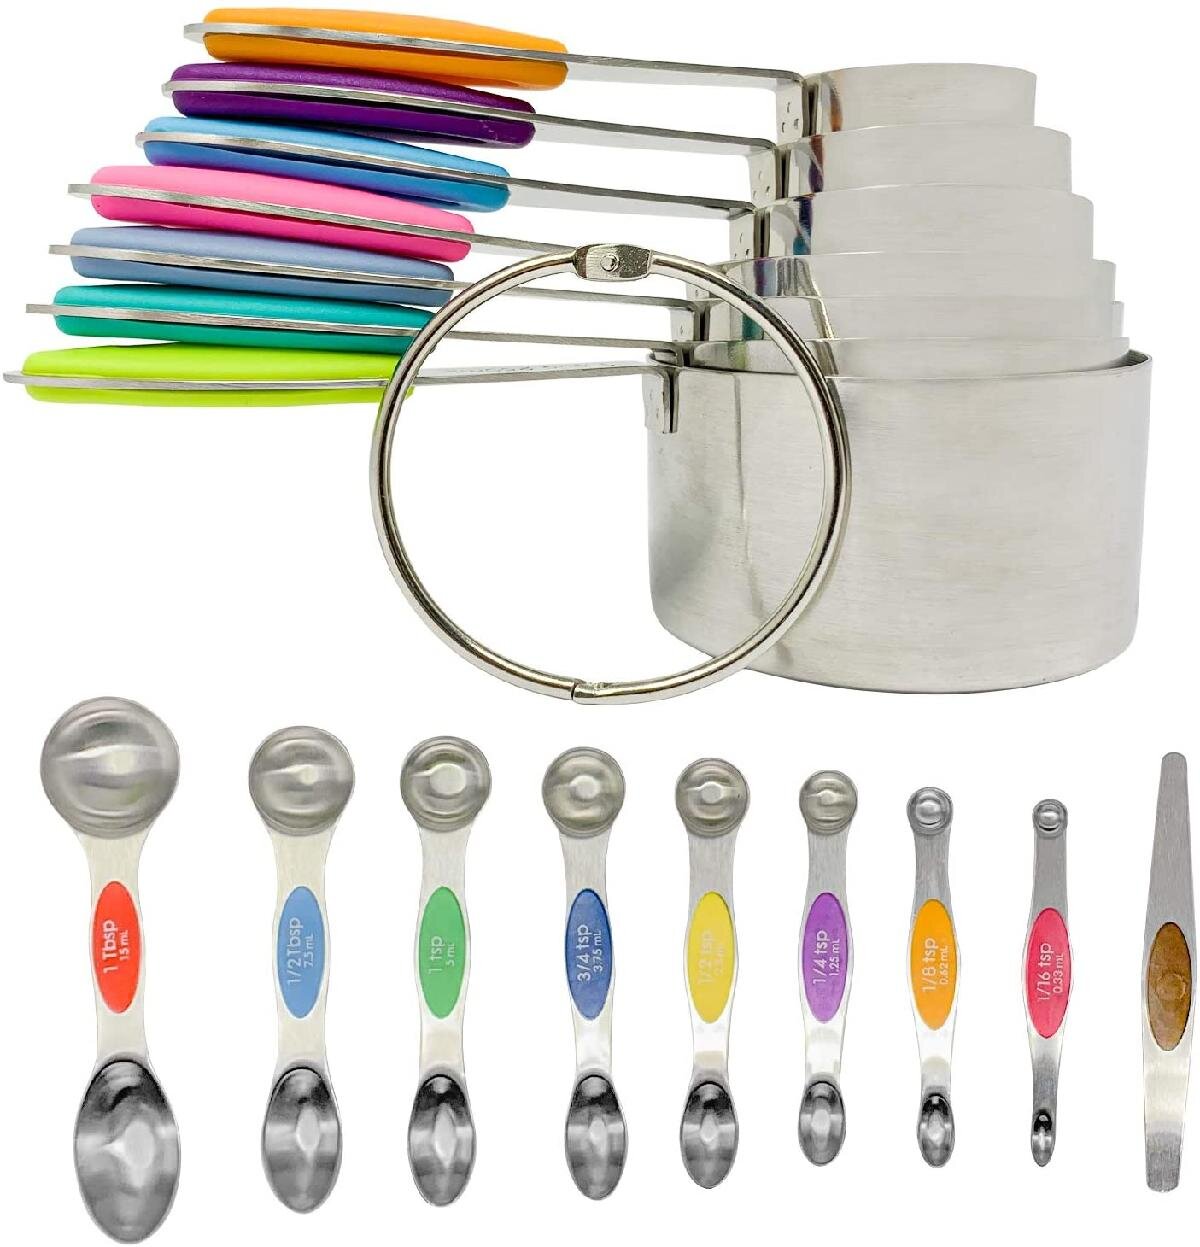 7 Cups and 7 Spoons Stainless Measuring Cups and Magnetic Measuring Spoons Set